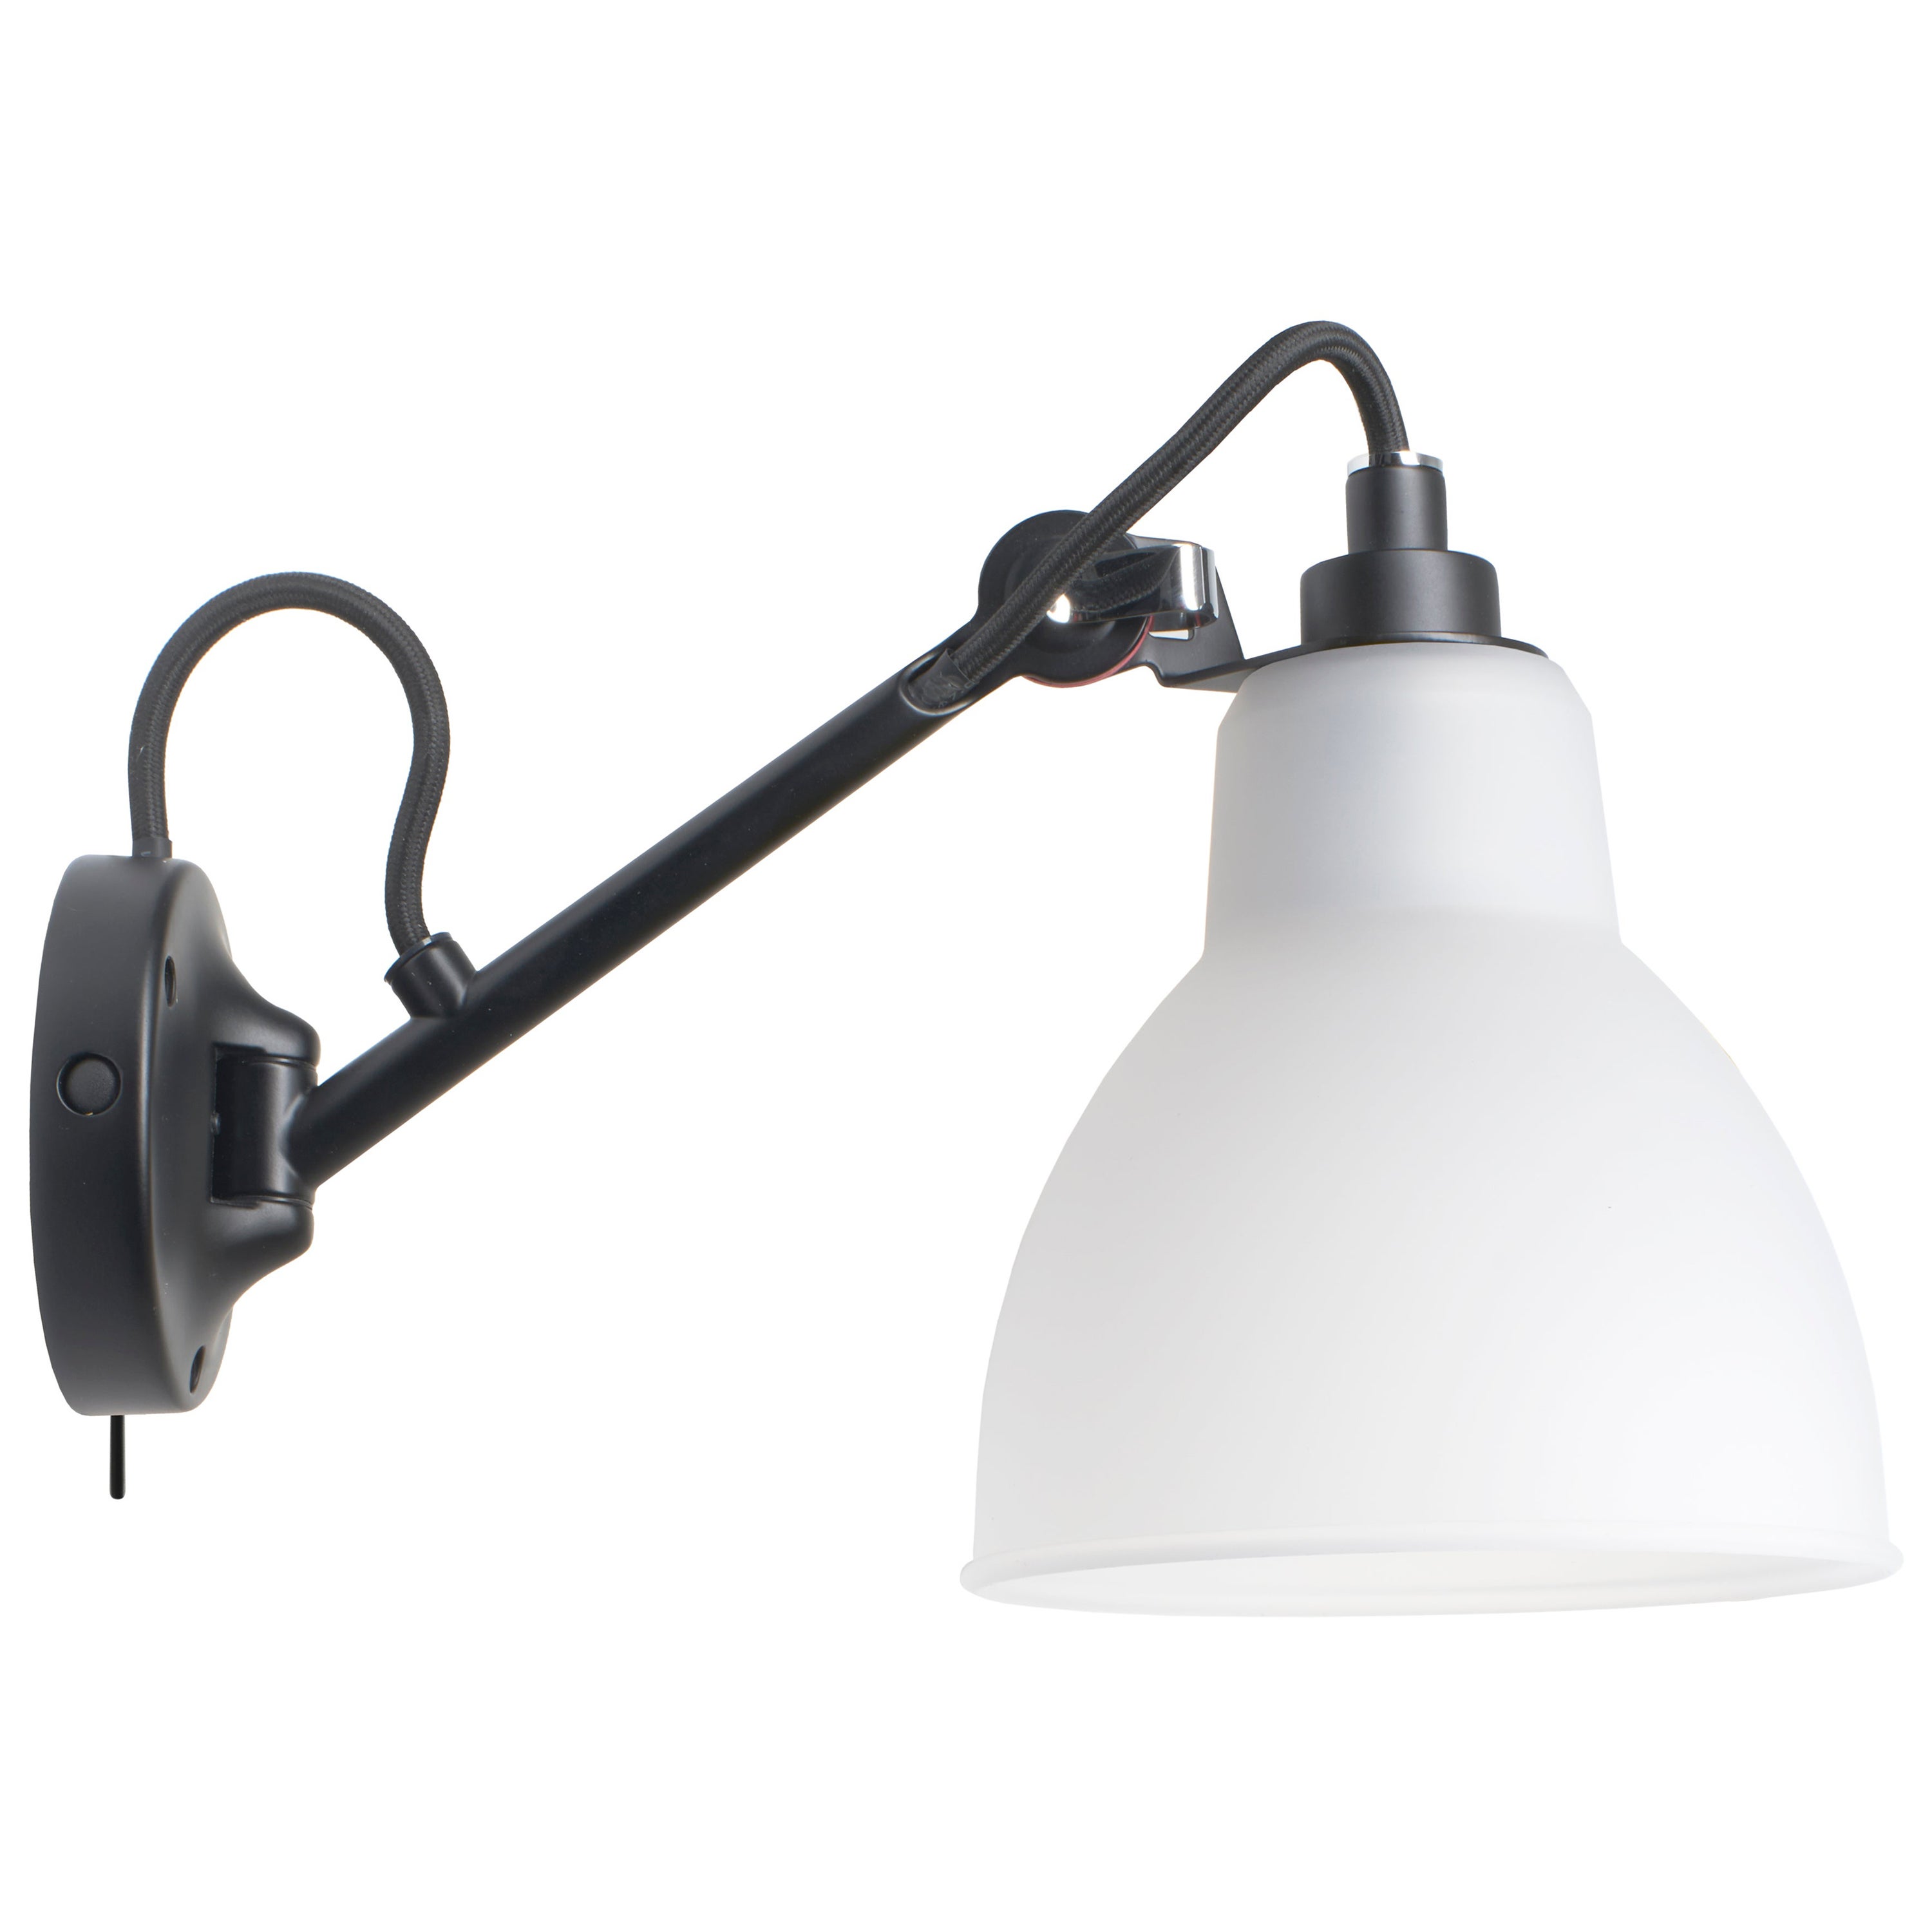 DCW Editions La Lampe Gras N°104 SW Wall Lamp in Black Arm & Polycarbonate Shade For Sale